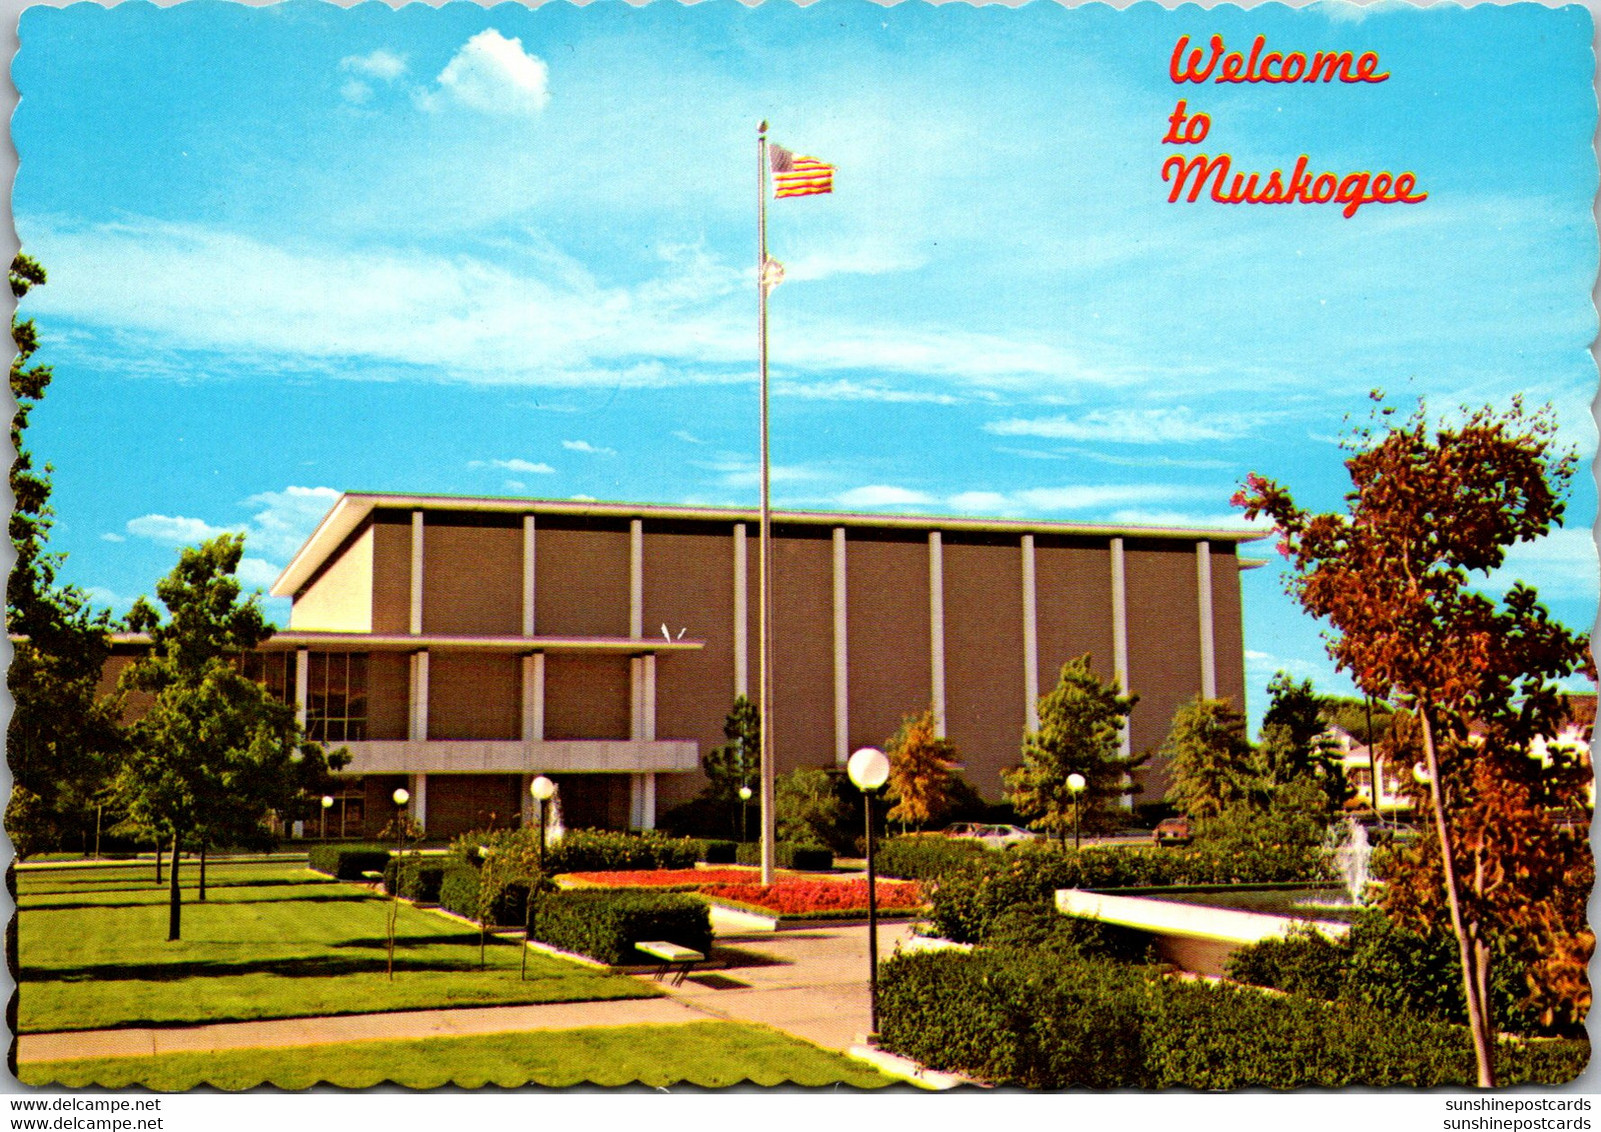 Oklahoma Muskogee Welcome Showing Civic Center - Muskogee